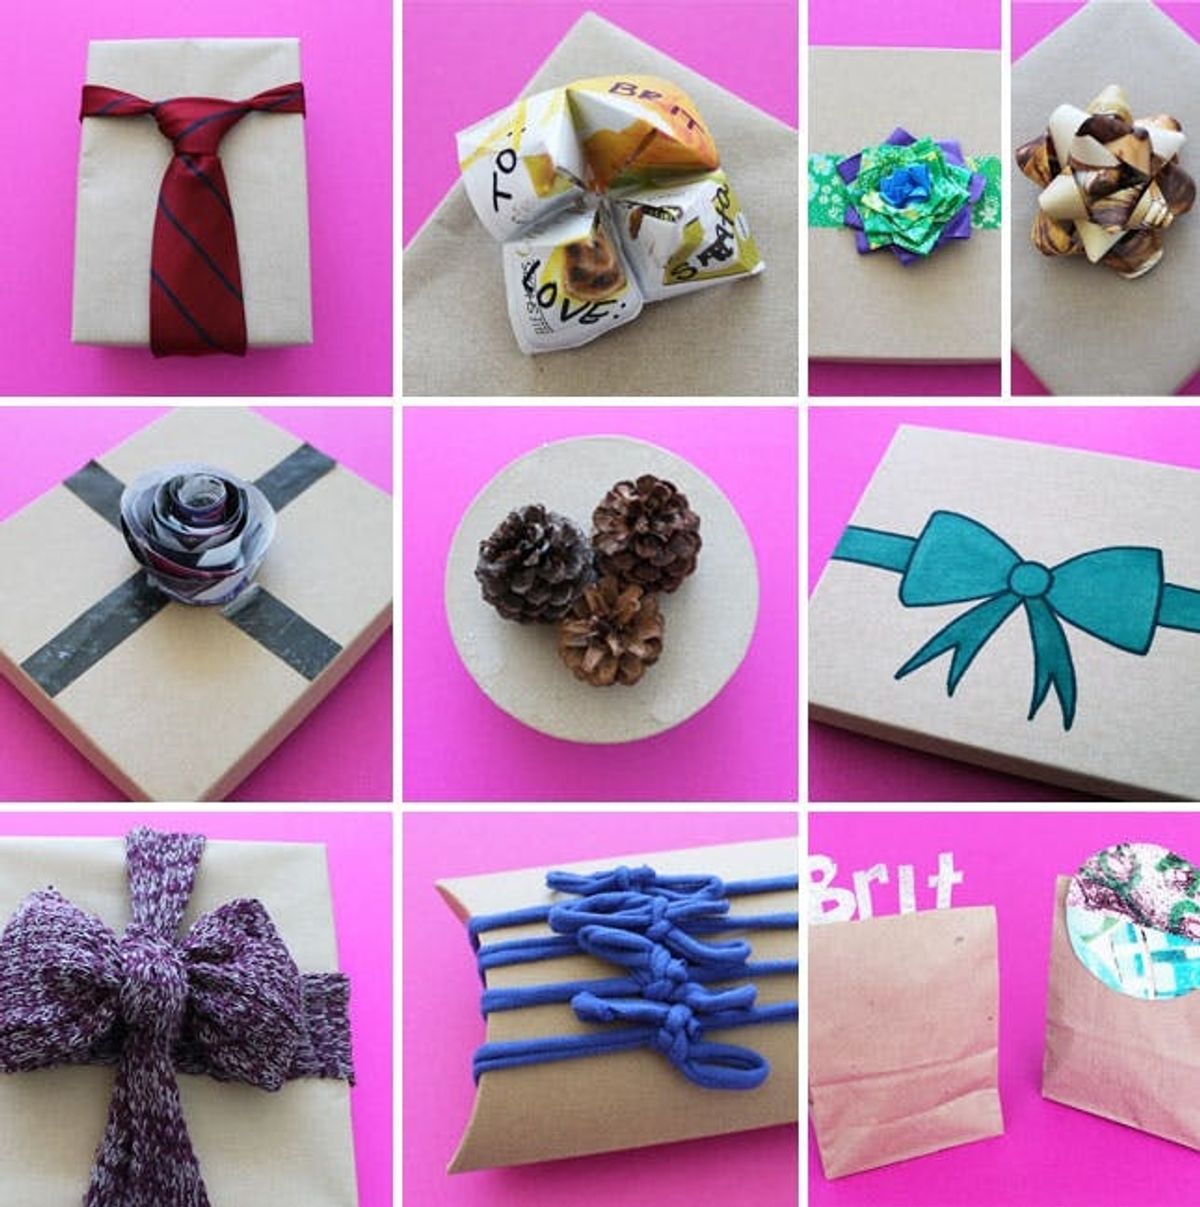 Put a Bow On It: 10 Unconventional Gift Toppers